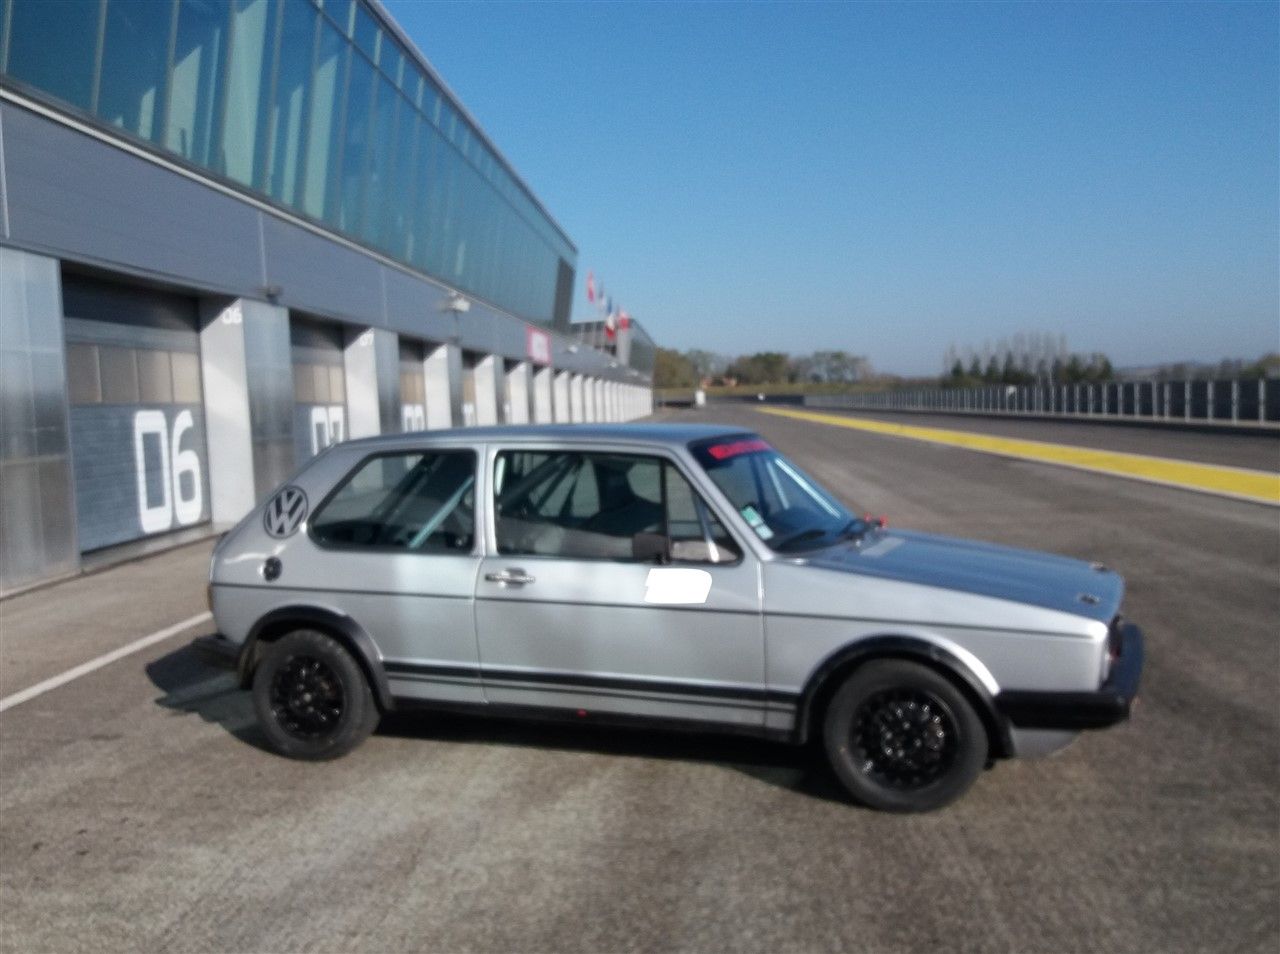 GOLF GTI Série 1 – 1980 This icon of the 75/80's youth is equipped for competiti&hellip;